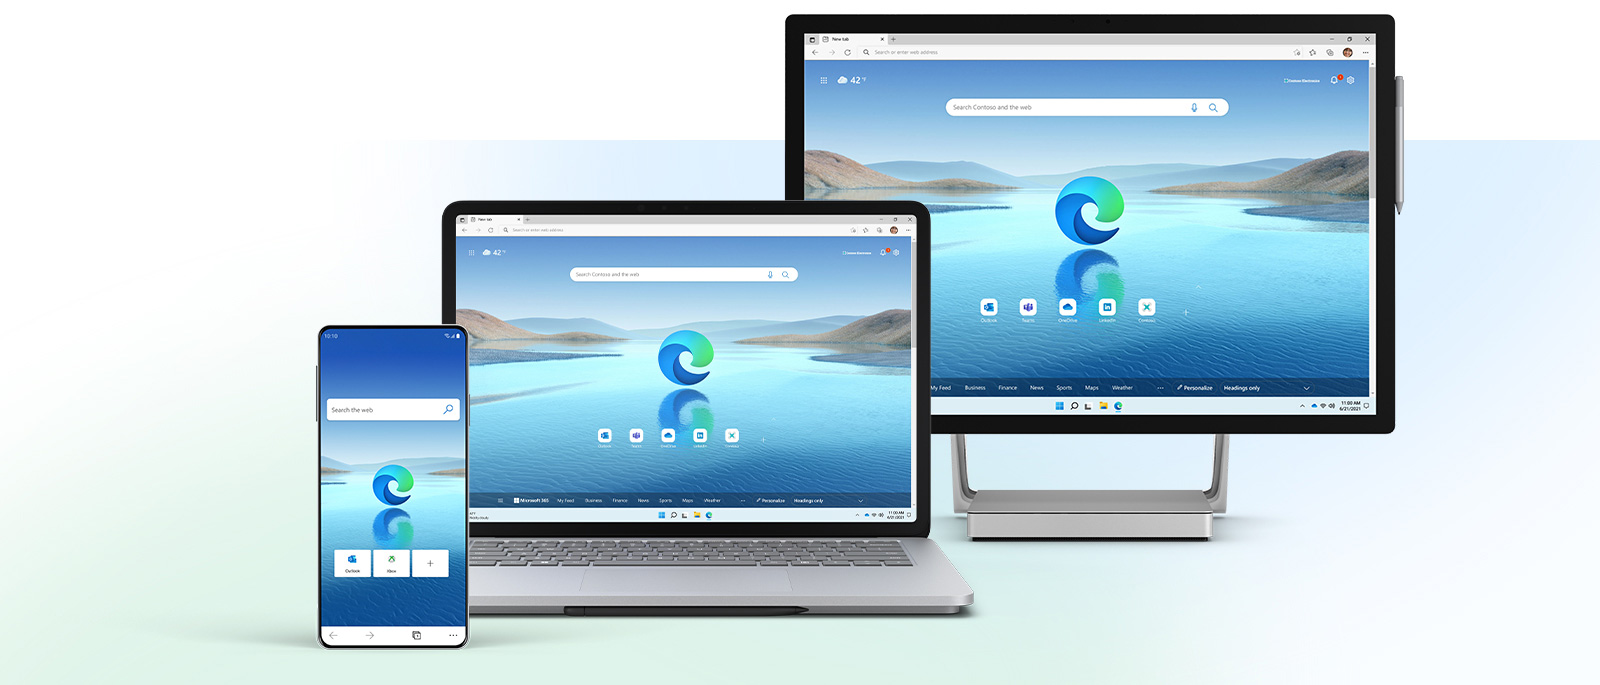 A phone, laptop and personal computer displaying Microsoft Edge on their screens.